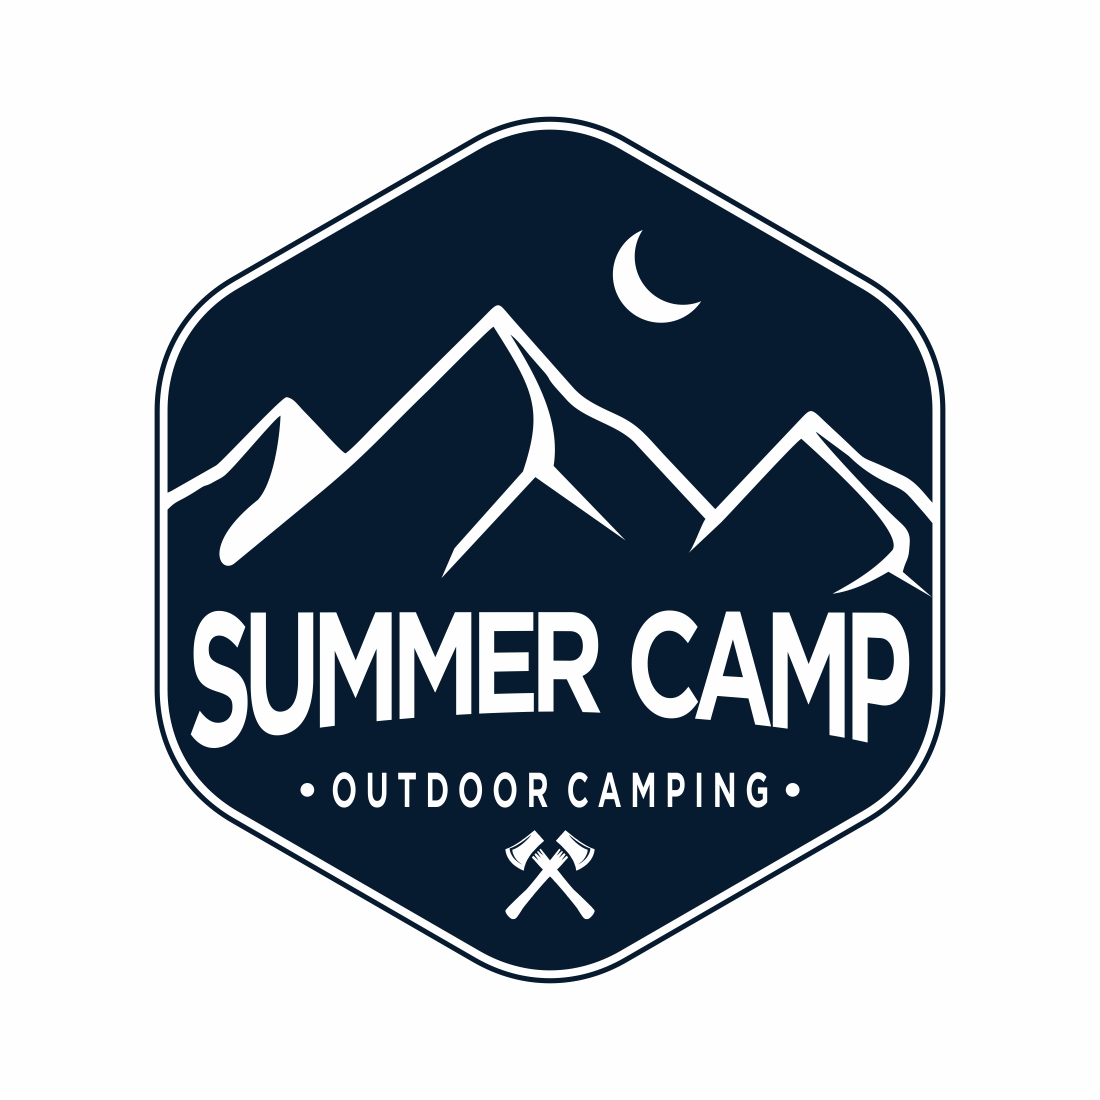 Illustration of a nighttime mountain camping logo design preview image.